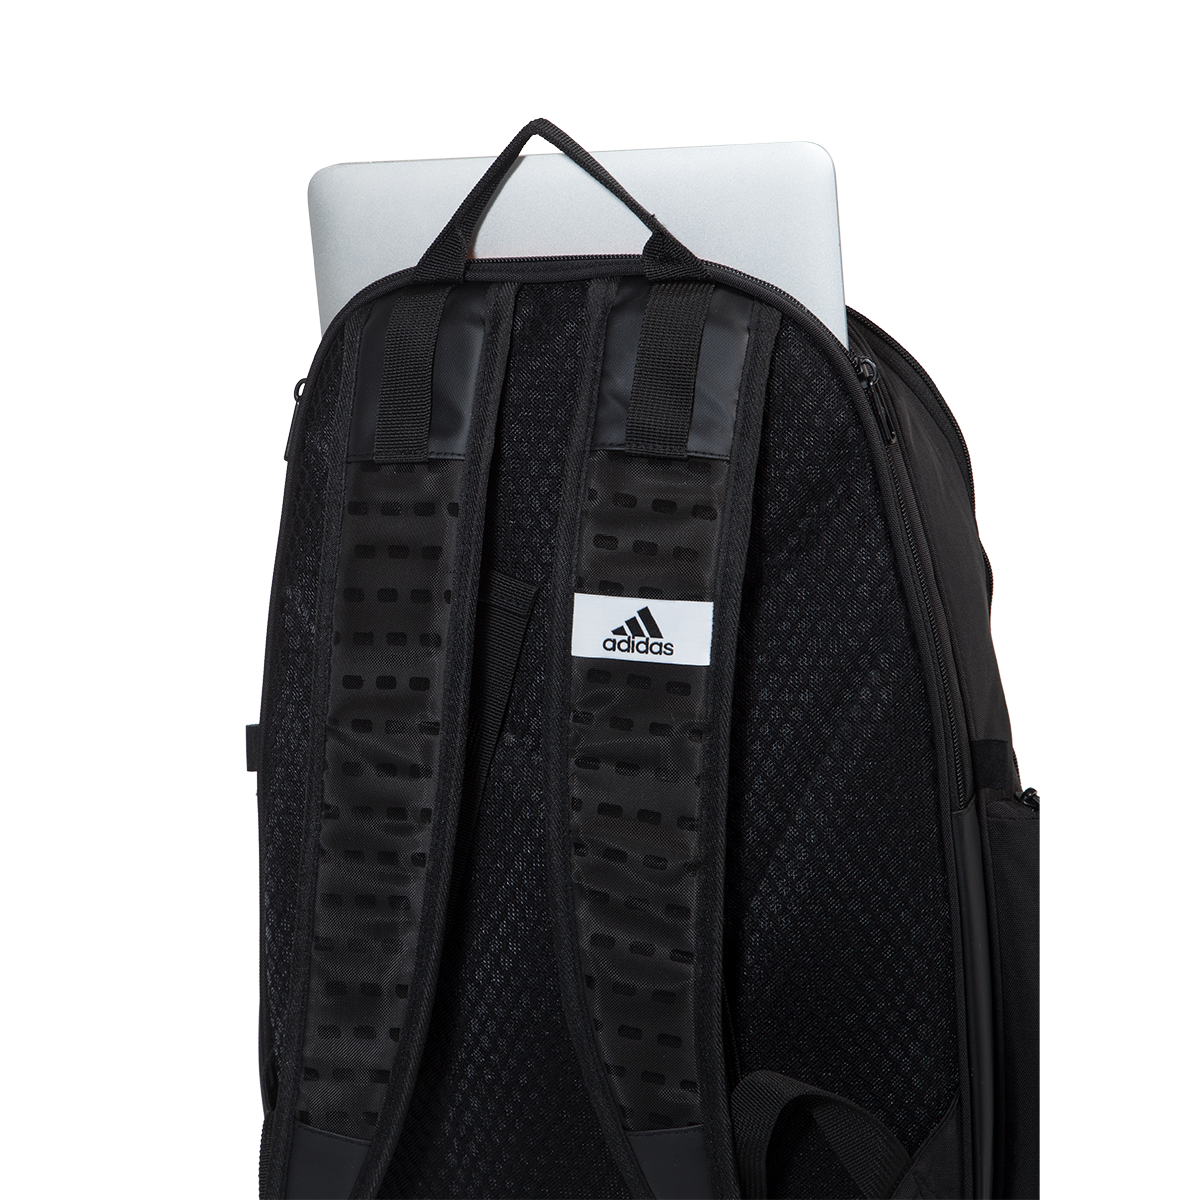 voor mij extreem Doe een poging ADIDAS Backpack PROTOUR LIME - All For Padel